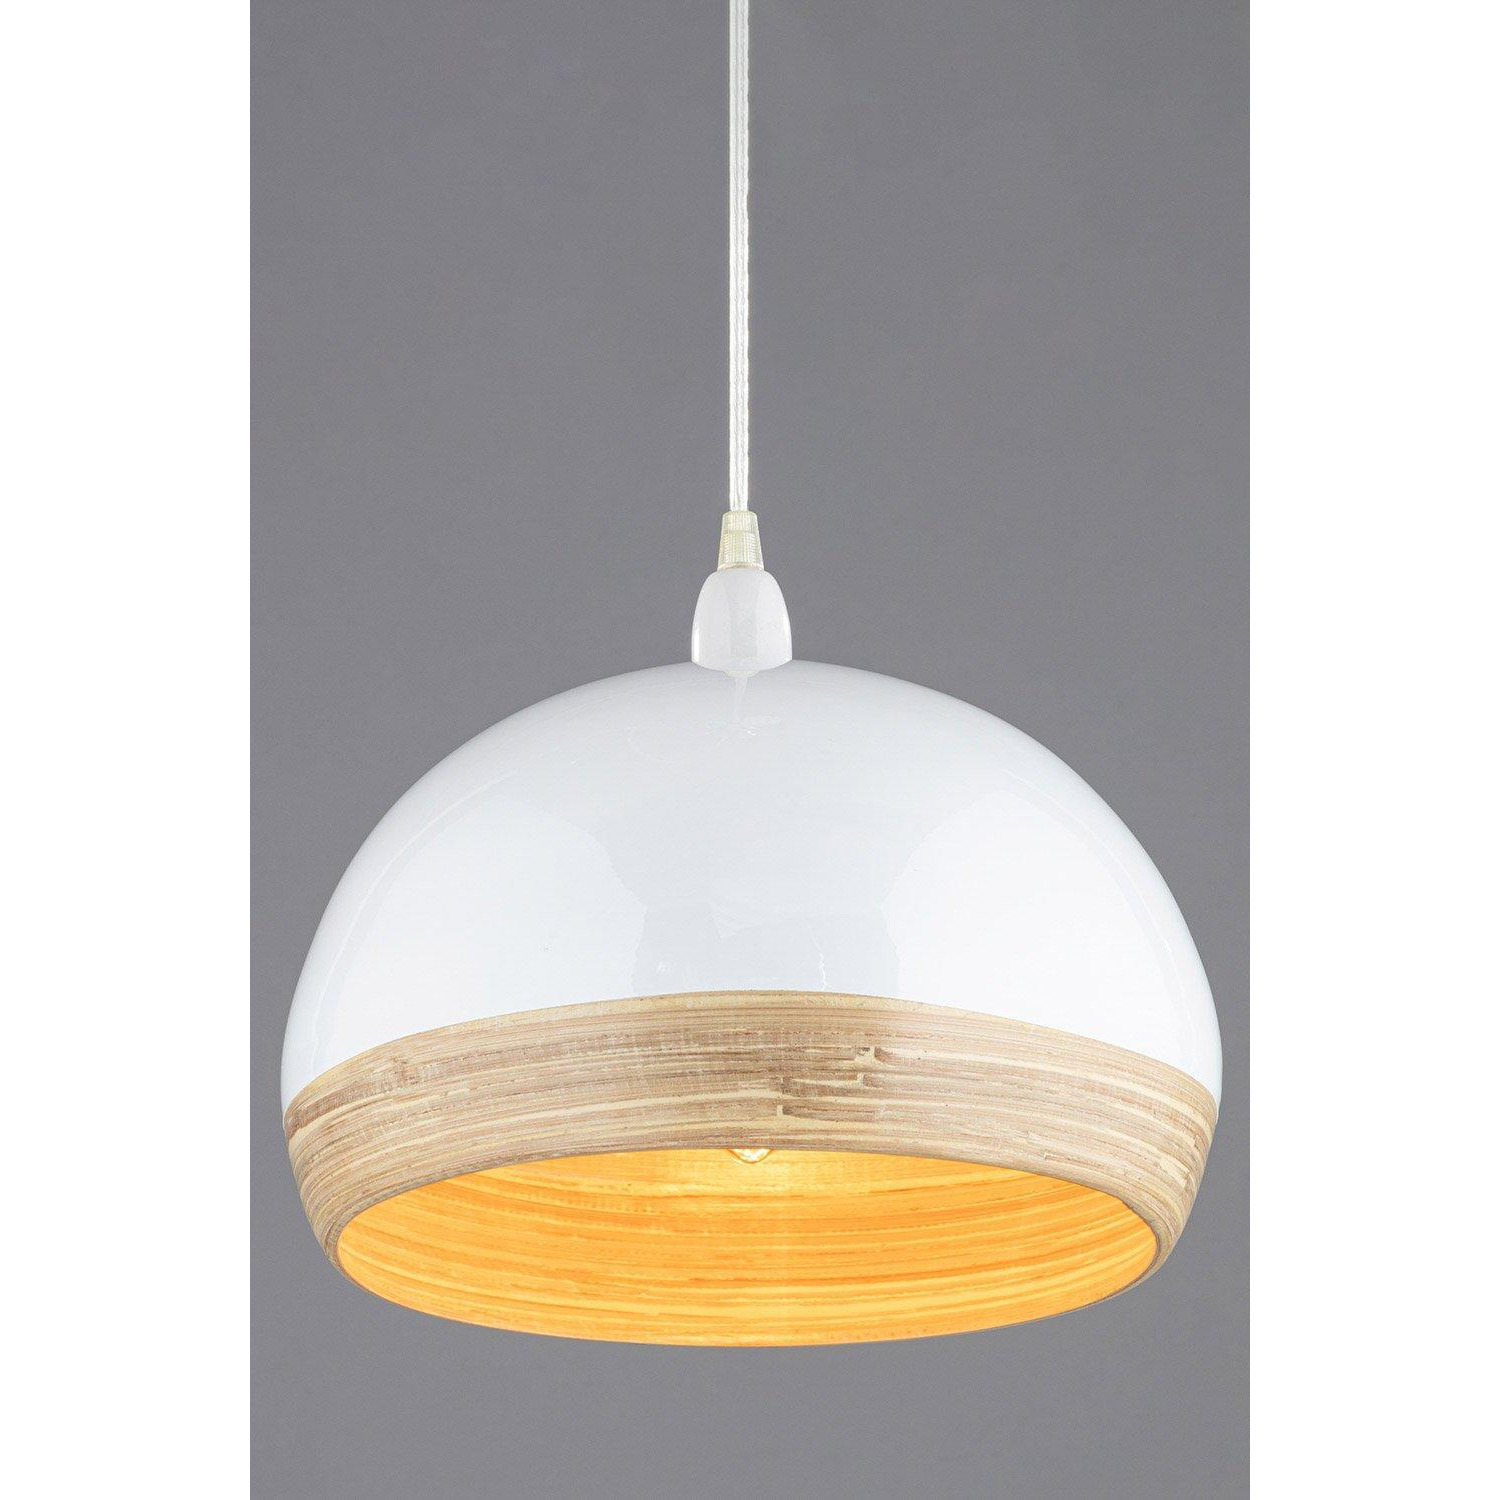 Dome Easy Fit Light Shade - image 1